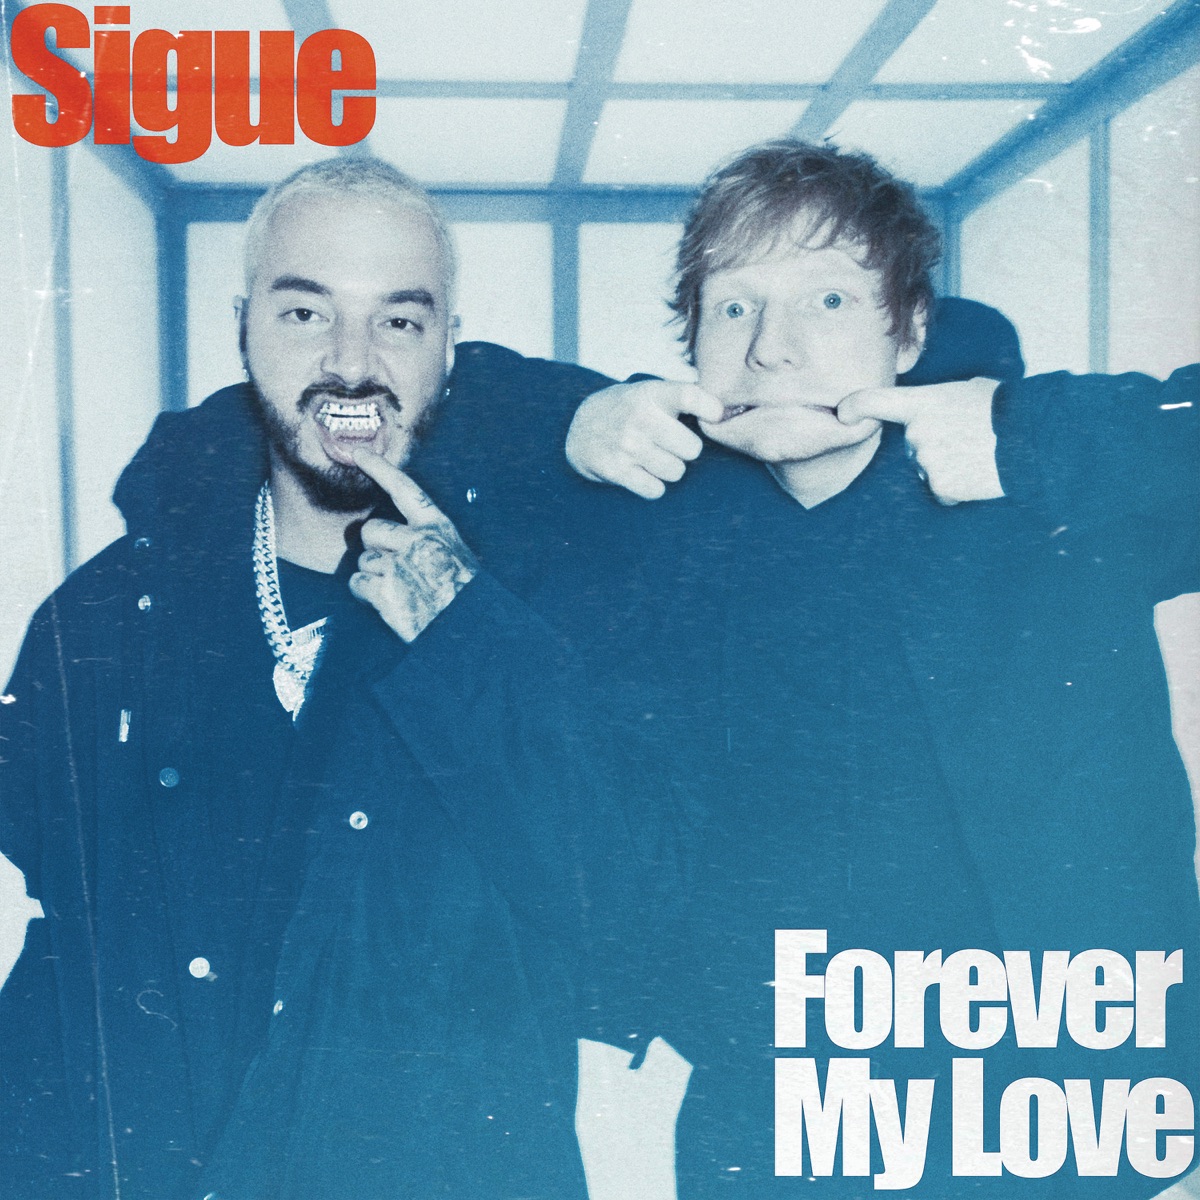 Cover for『J Balvin & Ed Sheeran - Forever My Love』from the release『Sigue / Forever My Love』